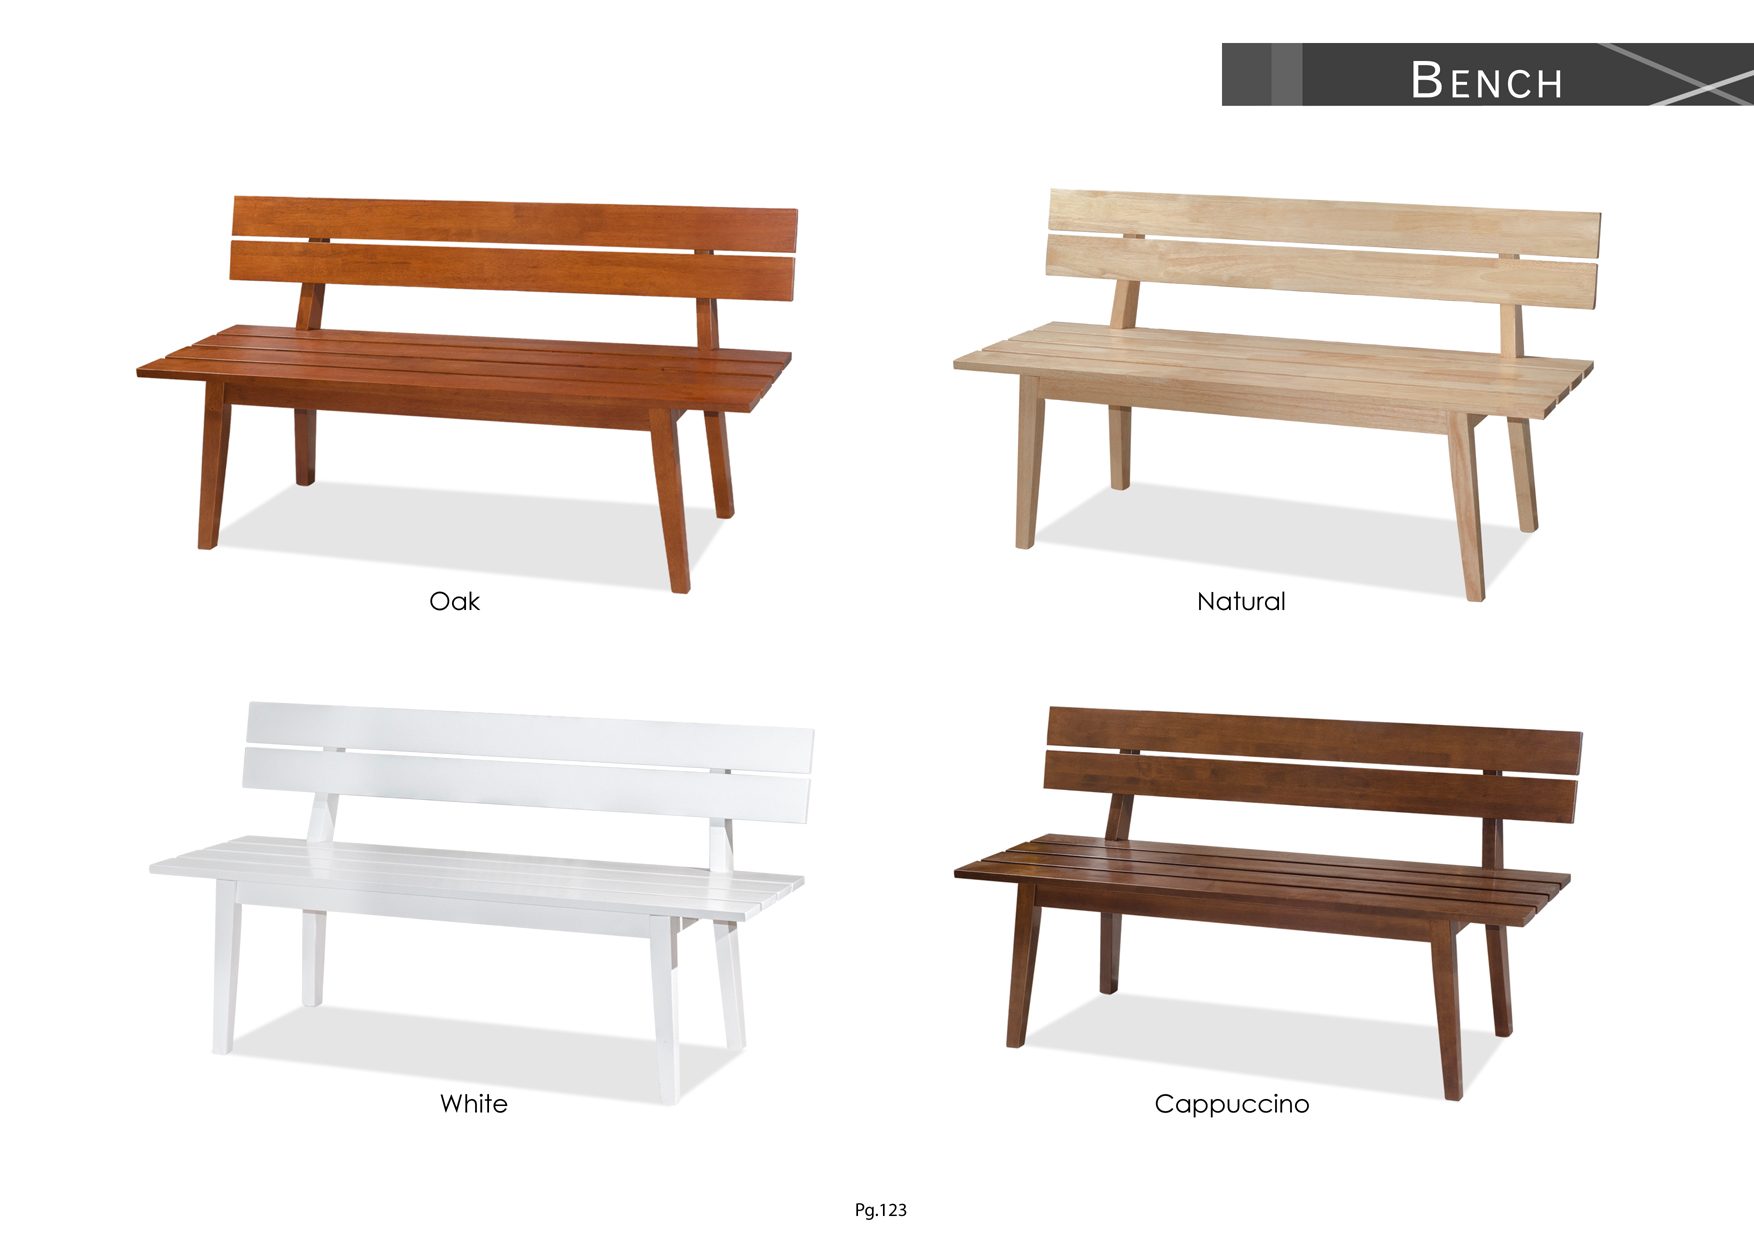 Product: PG123. MELODY BENCH